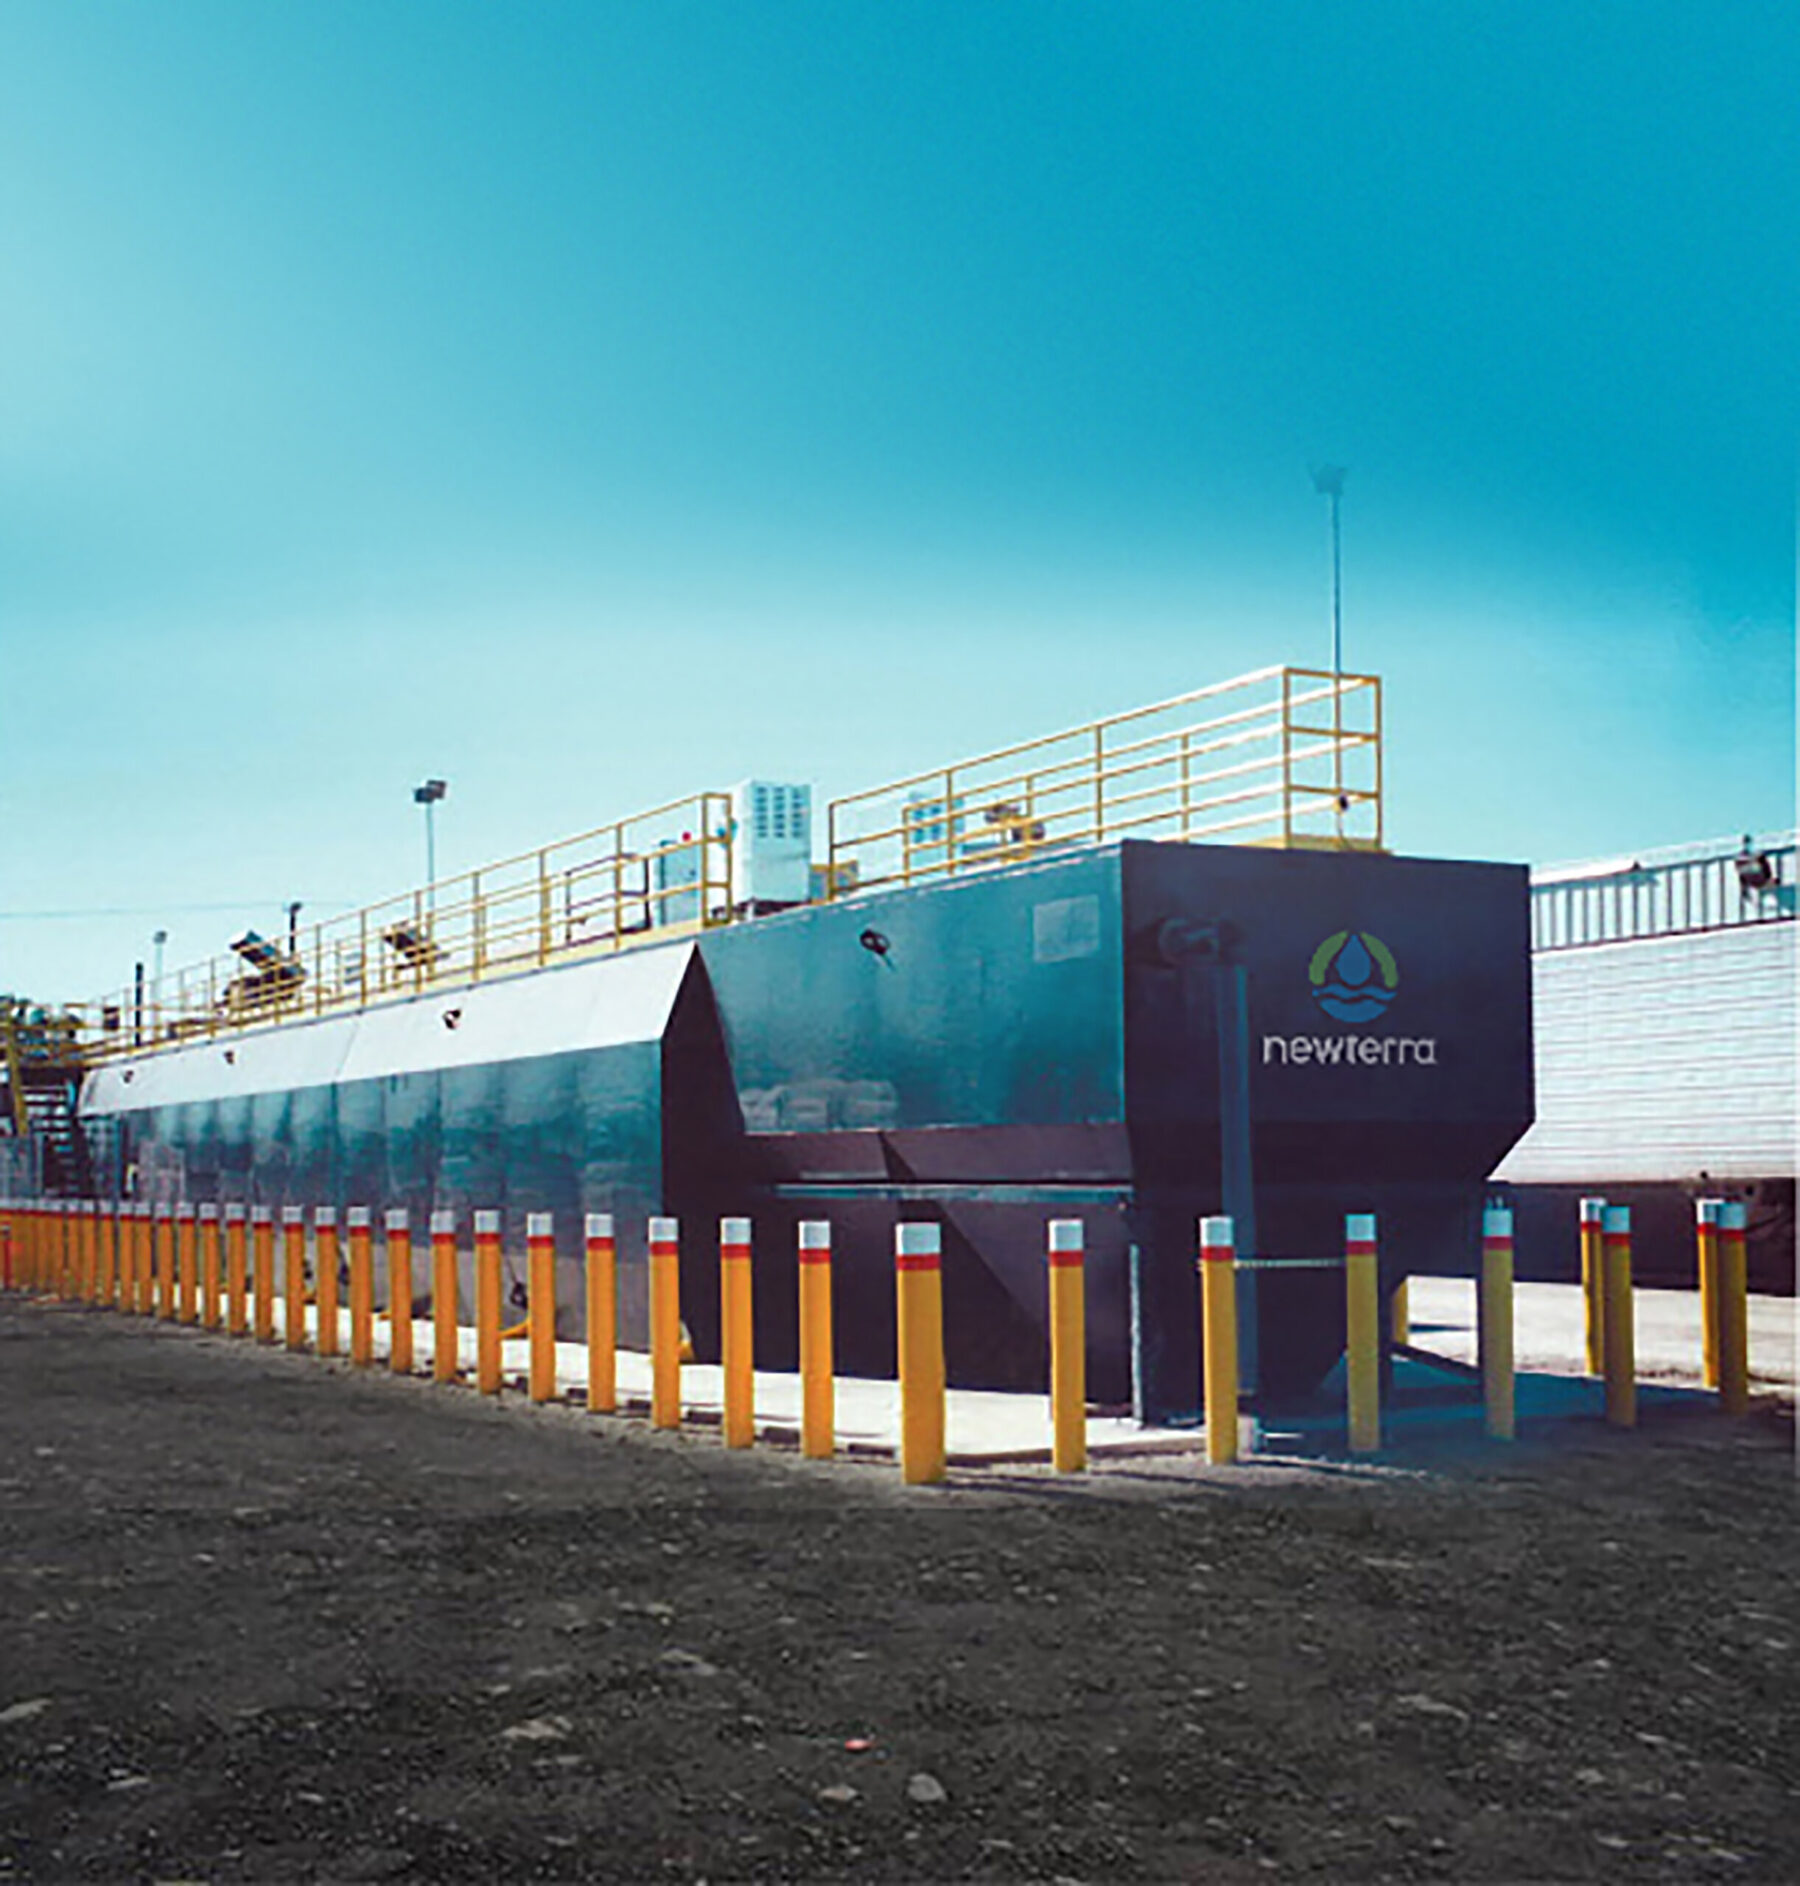 Newterra's Unisystem water treatment plant technology consisting of a large blue painted box and tank with walking railing on top and surrounded by drive proof yellow posts